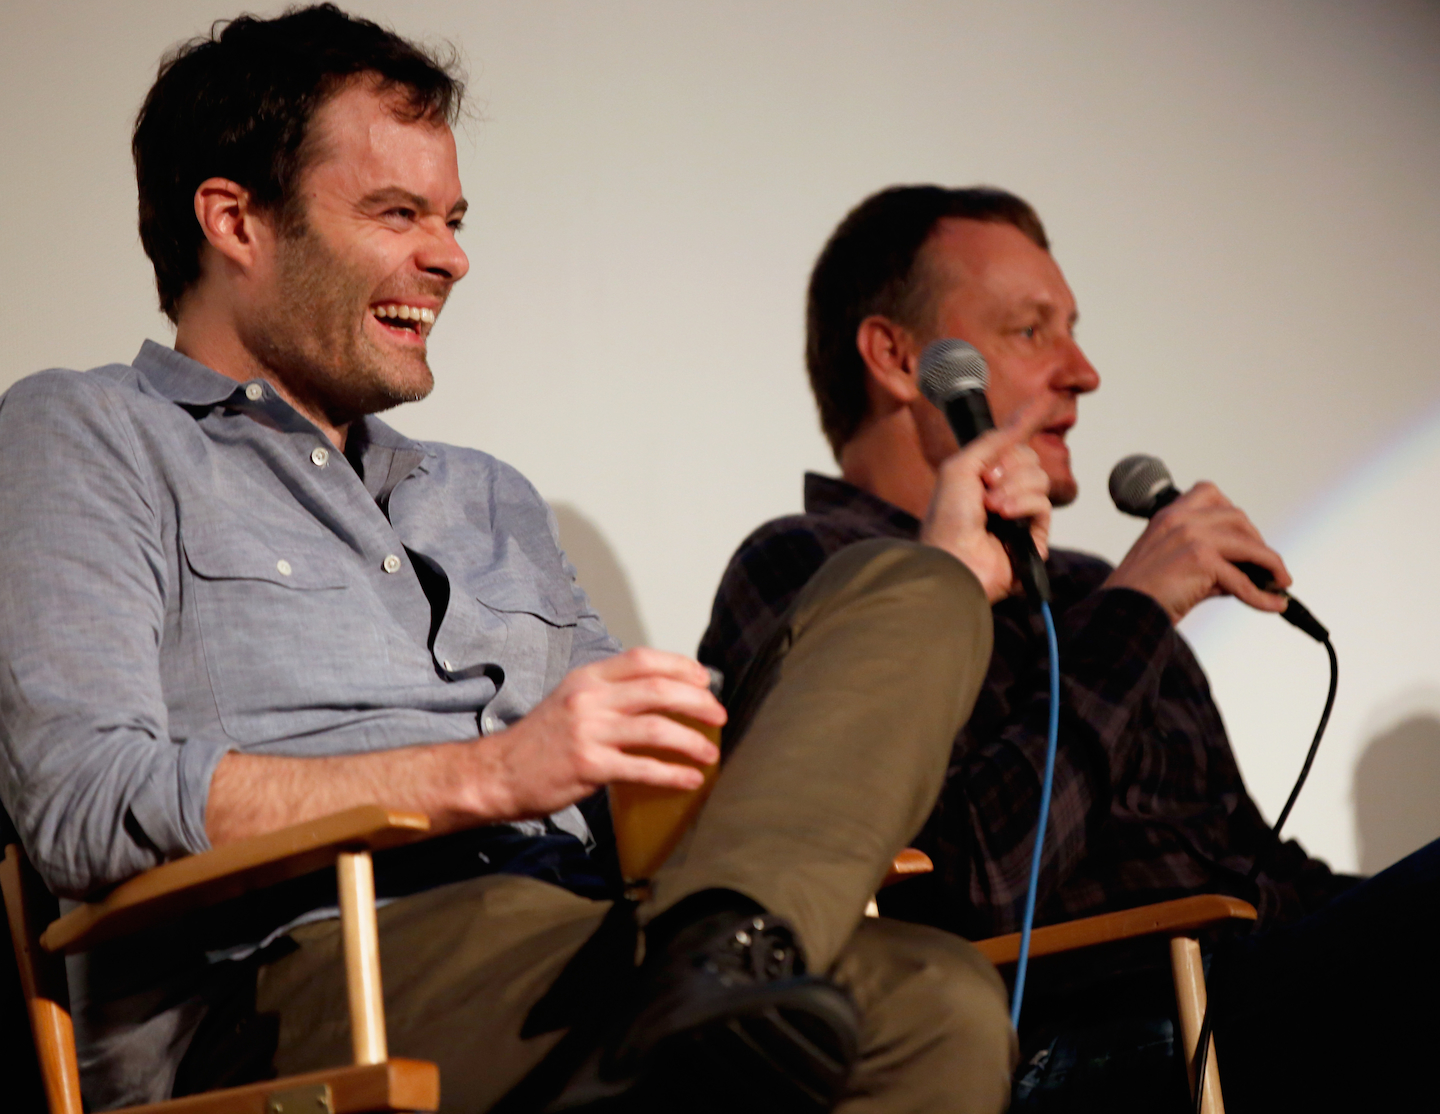 Alex Berg and Bill Hader at the Barry World Premiere. Photo by Sean Mathis/Getty Images for SXSW